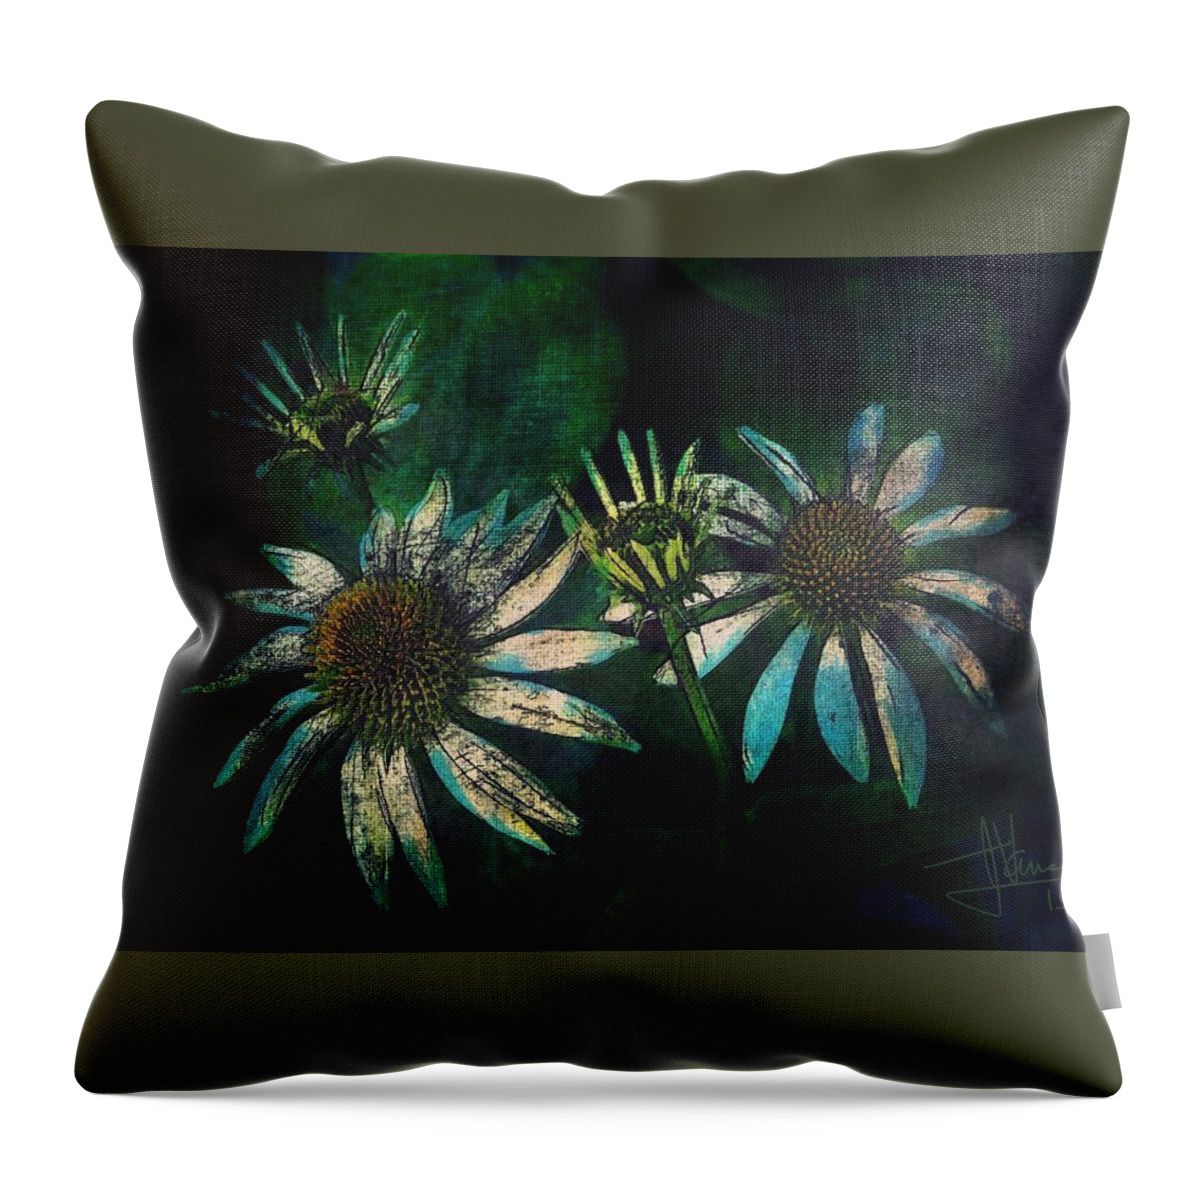 Flowers Throw Pillow featuring the photograph Garden Flowers 1 June 14 2015 by Jim Vance